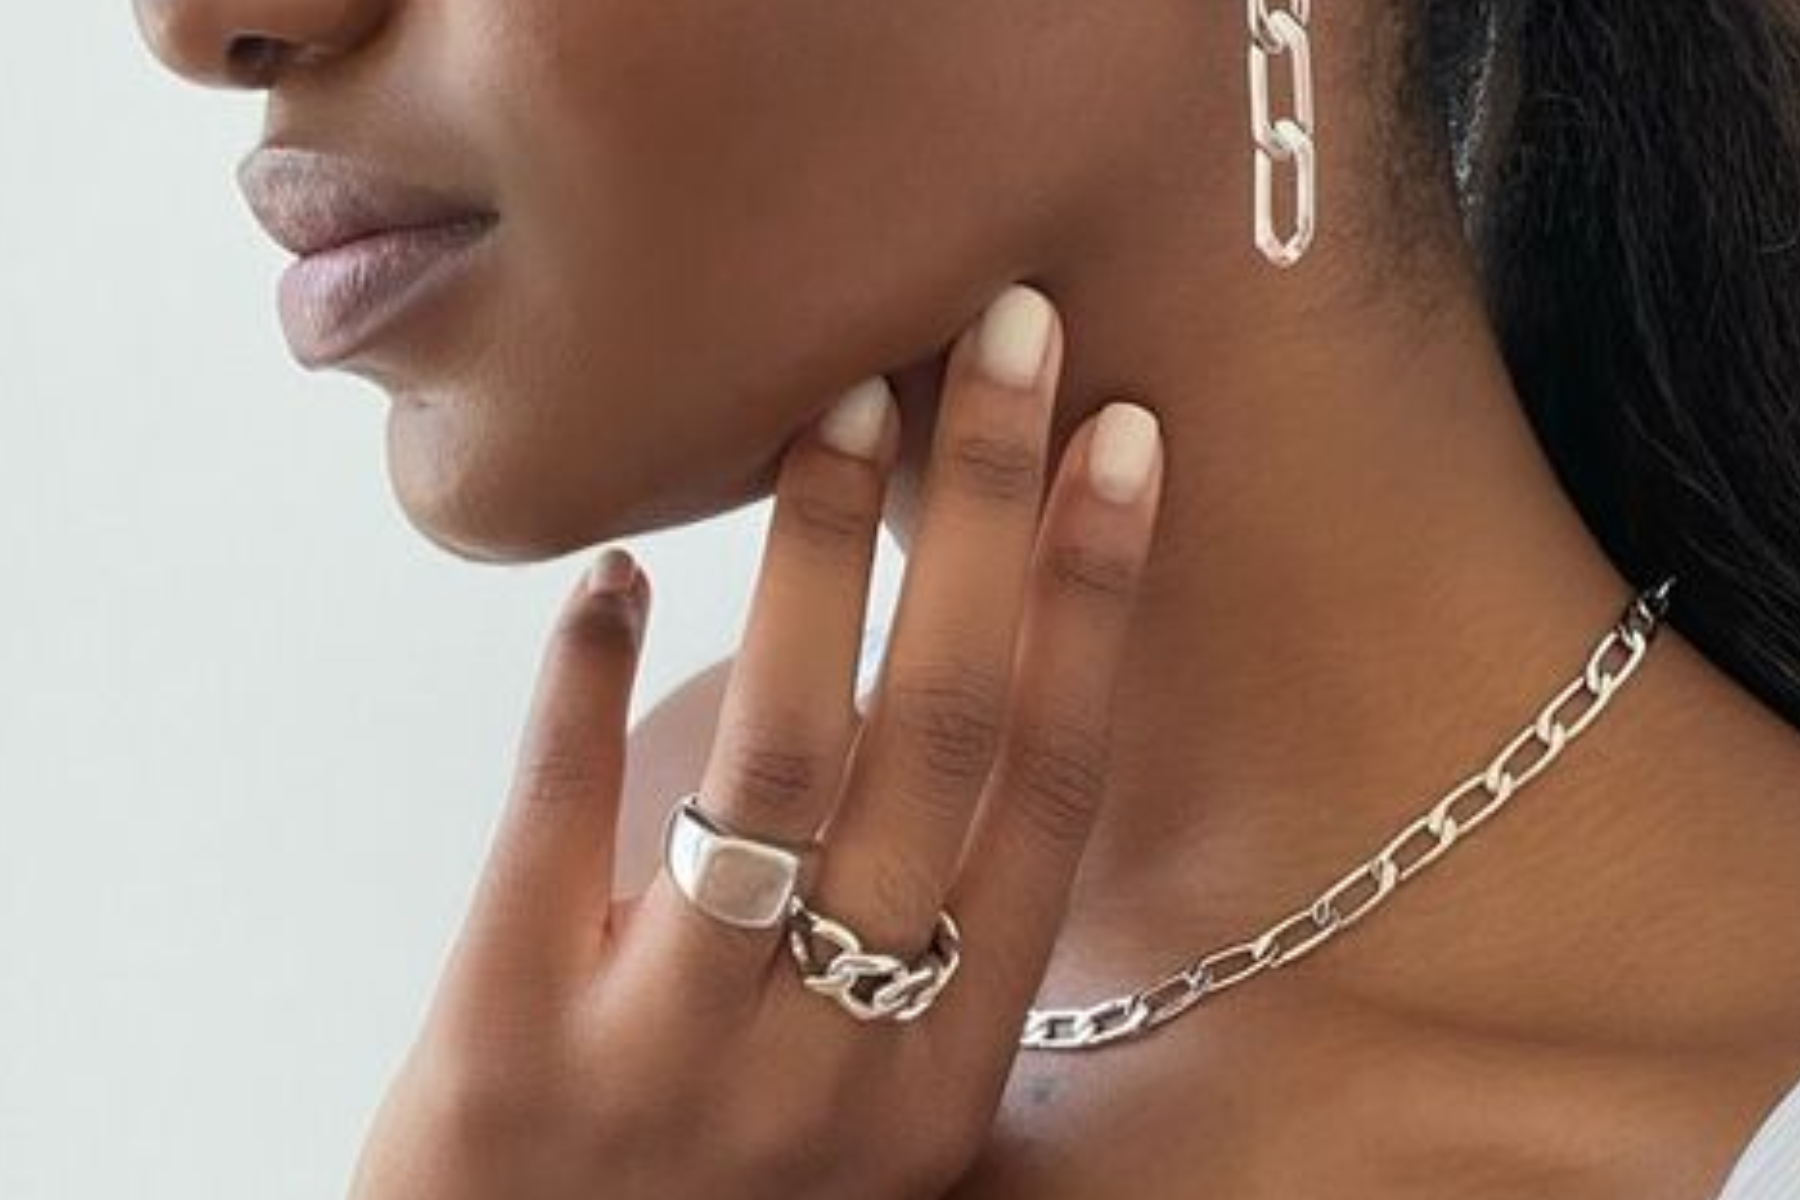 A stunning black woman adorned in silver chain jewelry